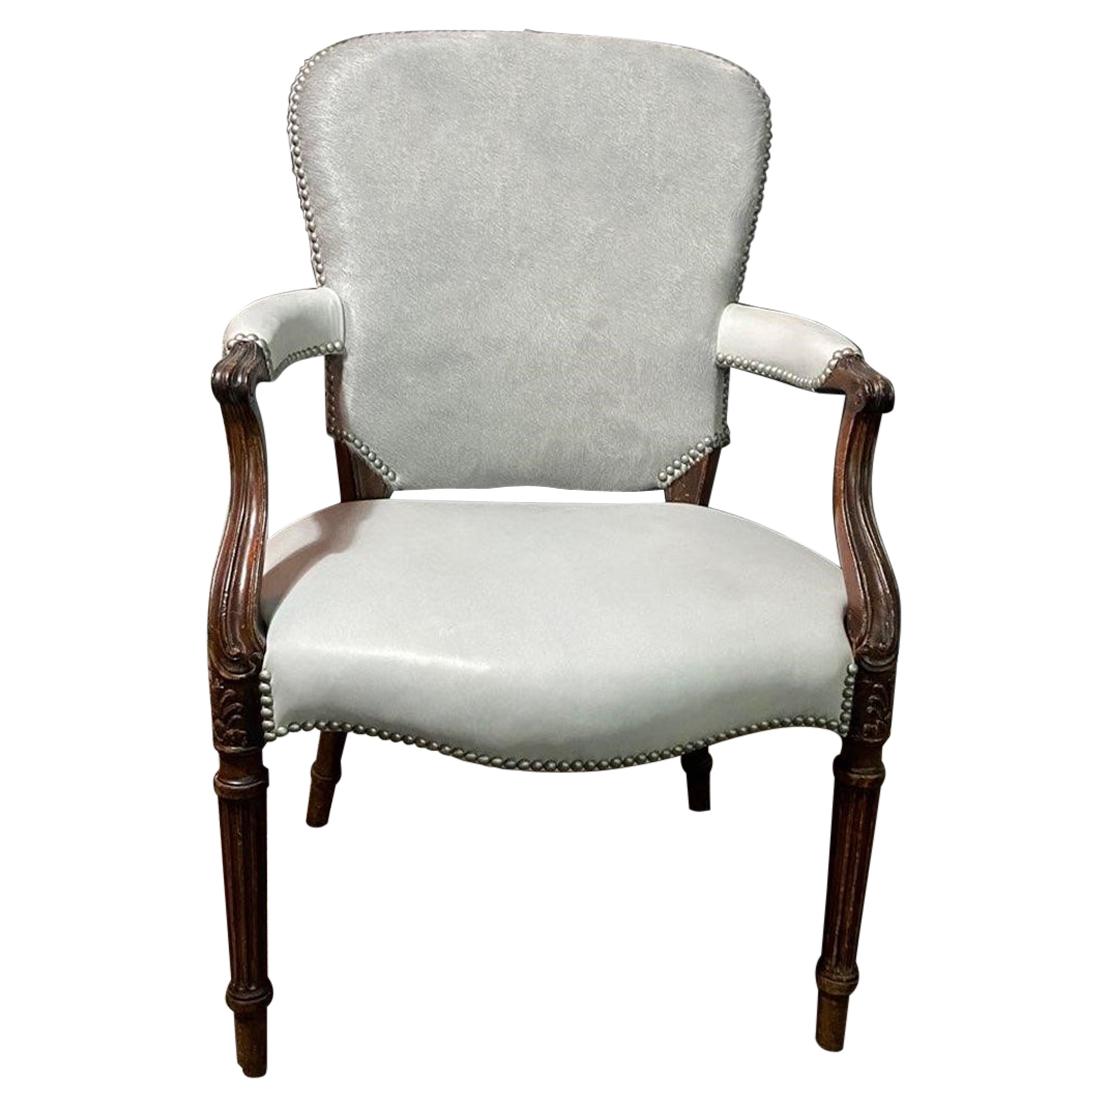 Chic Fauteuil in a Soft Gray Leather Seat and Matching Hair-on-Hide Back For Sale